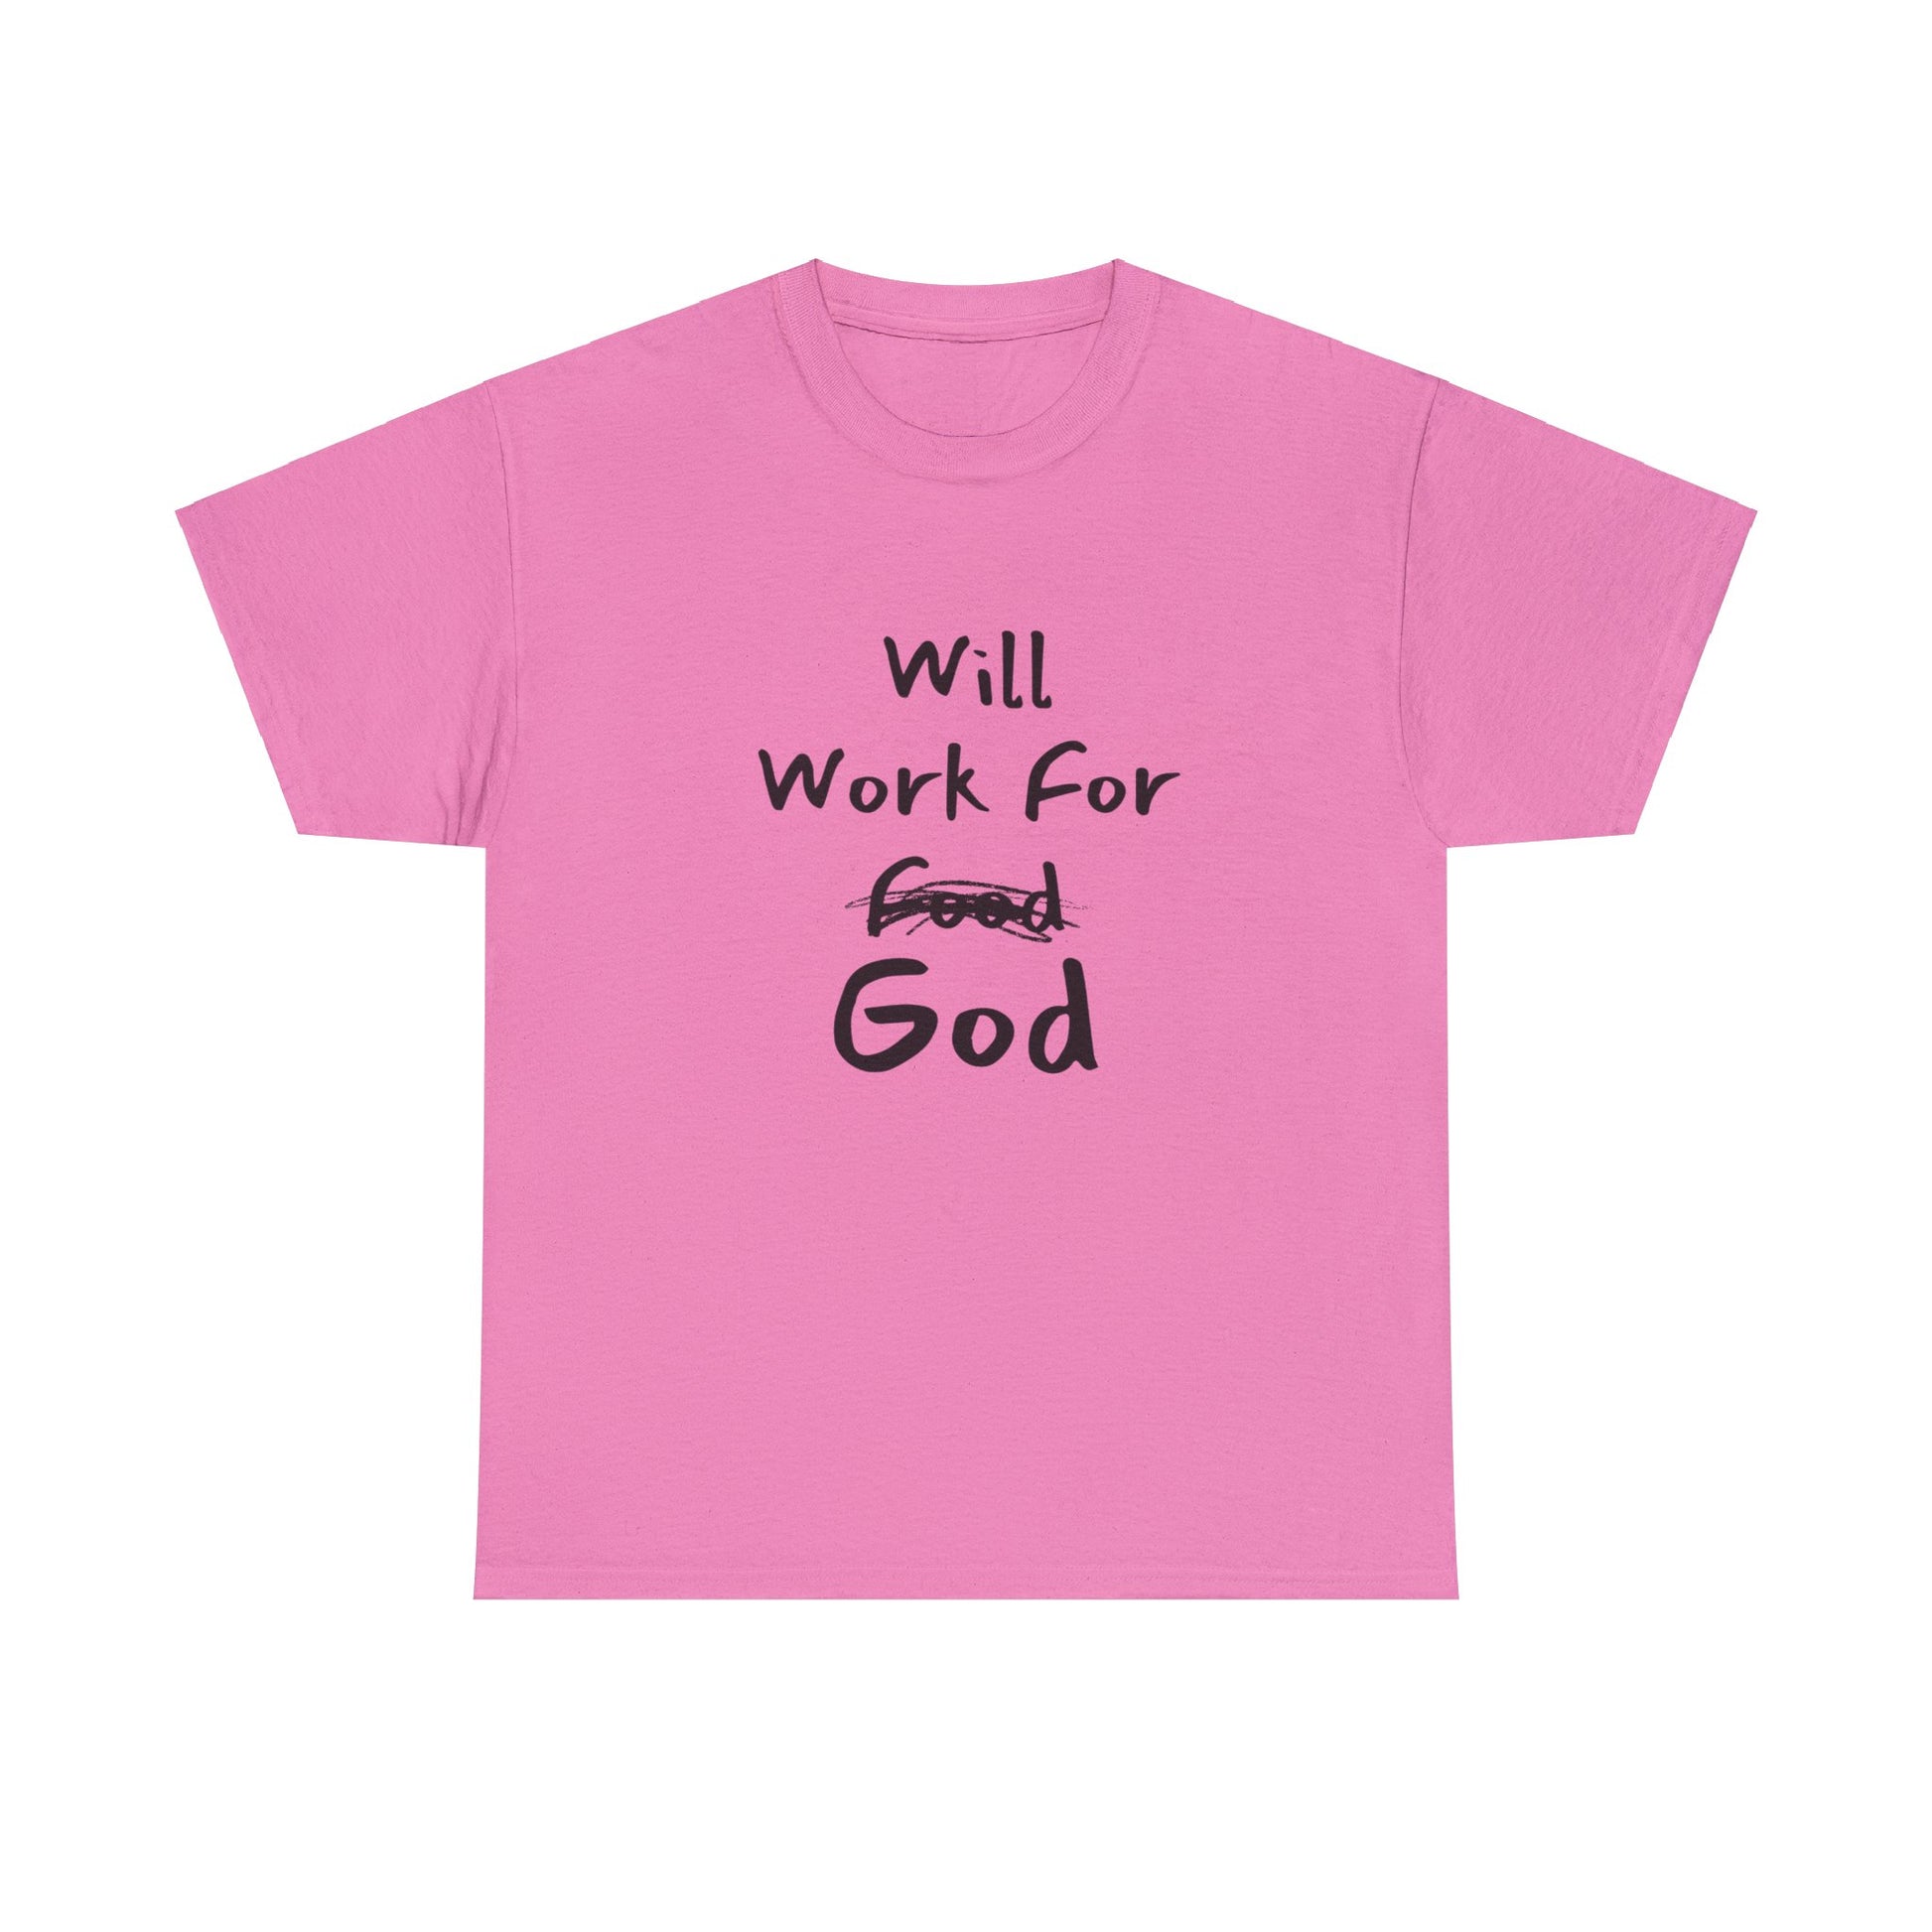 "Spiritual service slogan T-shirt Will Work For God in SVG, PDF, PNG."